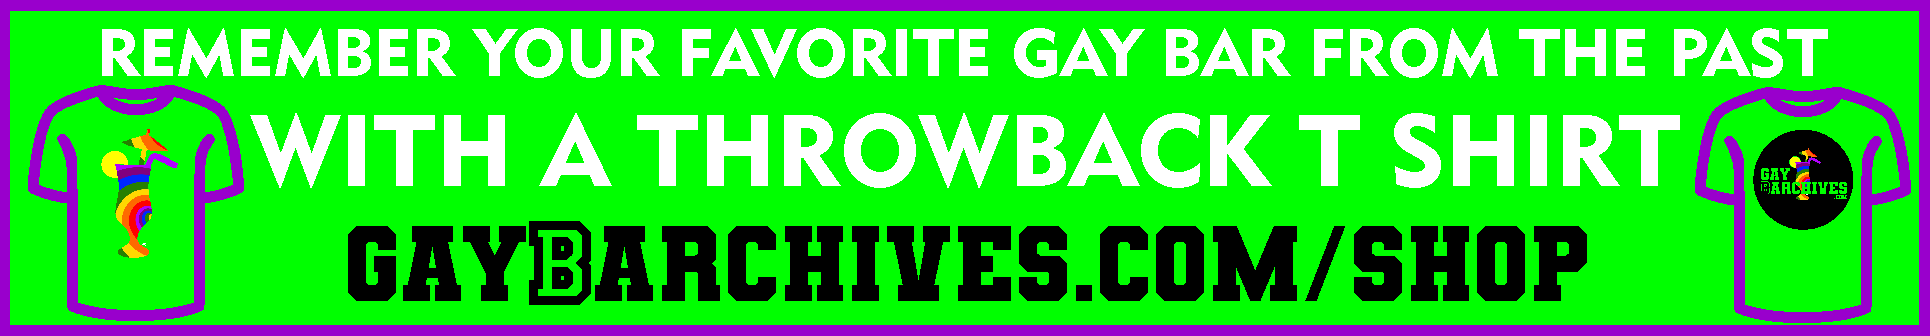 Did we miss an archive featuring information, photos and ephemera from our colorful gay and lesbian past? Let us know and we'll add it!  GayBarchives: Exploring Gay History One Bar at a Time Queer Archives ! Gay Archives, Gay Bars, LGBTQIA history, queer history, nightlife, disco, entertainment, homosexual, lesbian